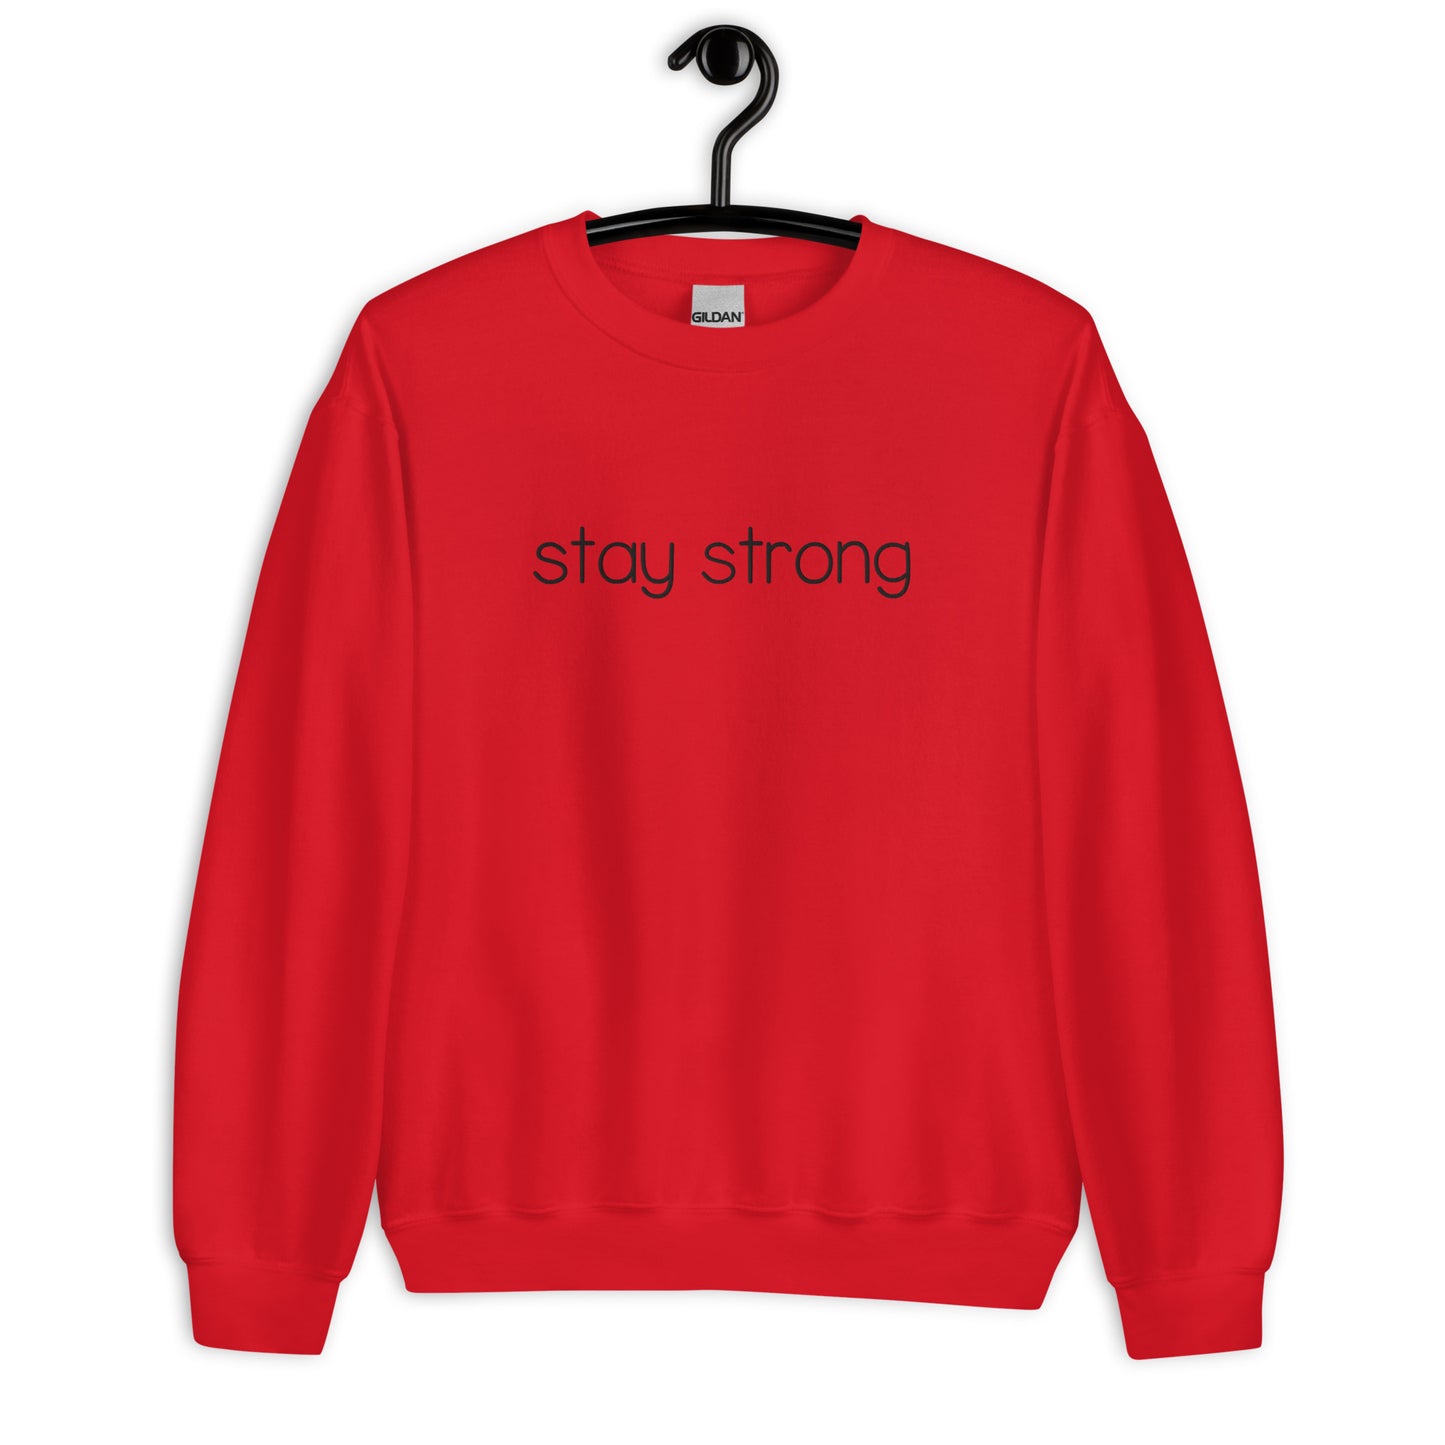 Stay Strong Embroidered Sweatshirt